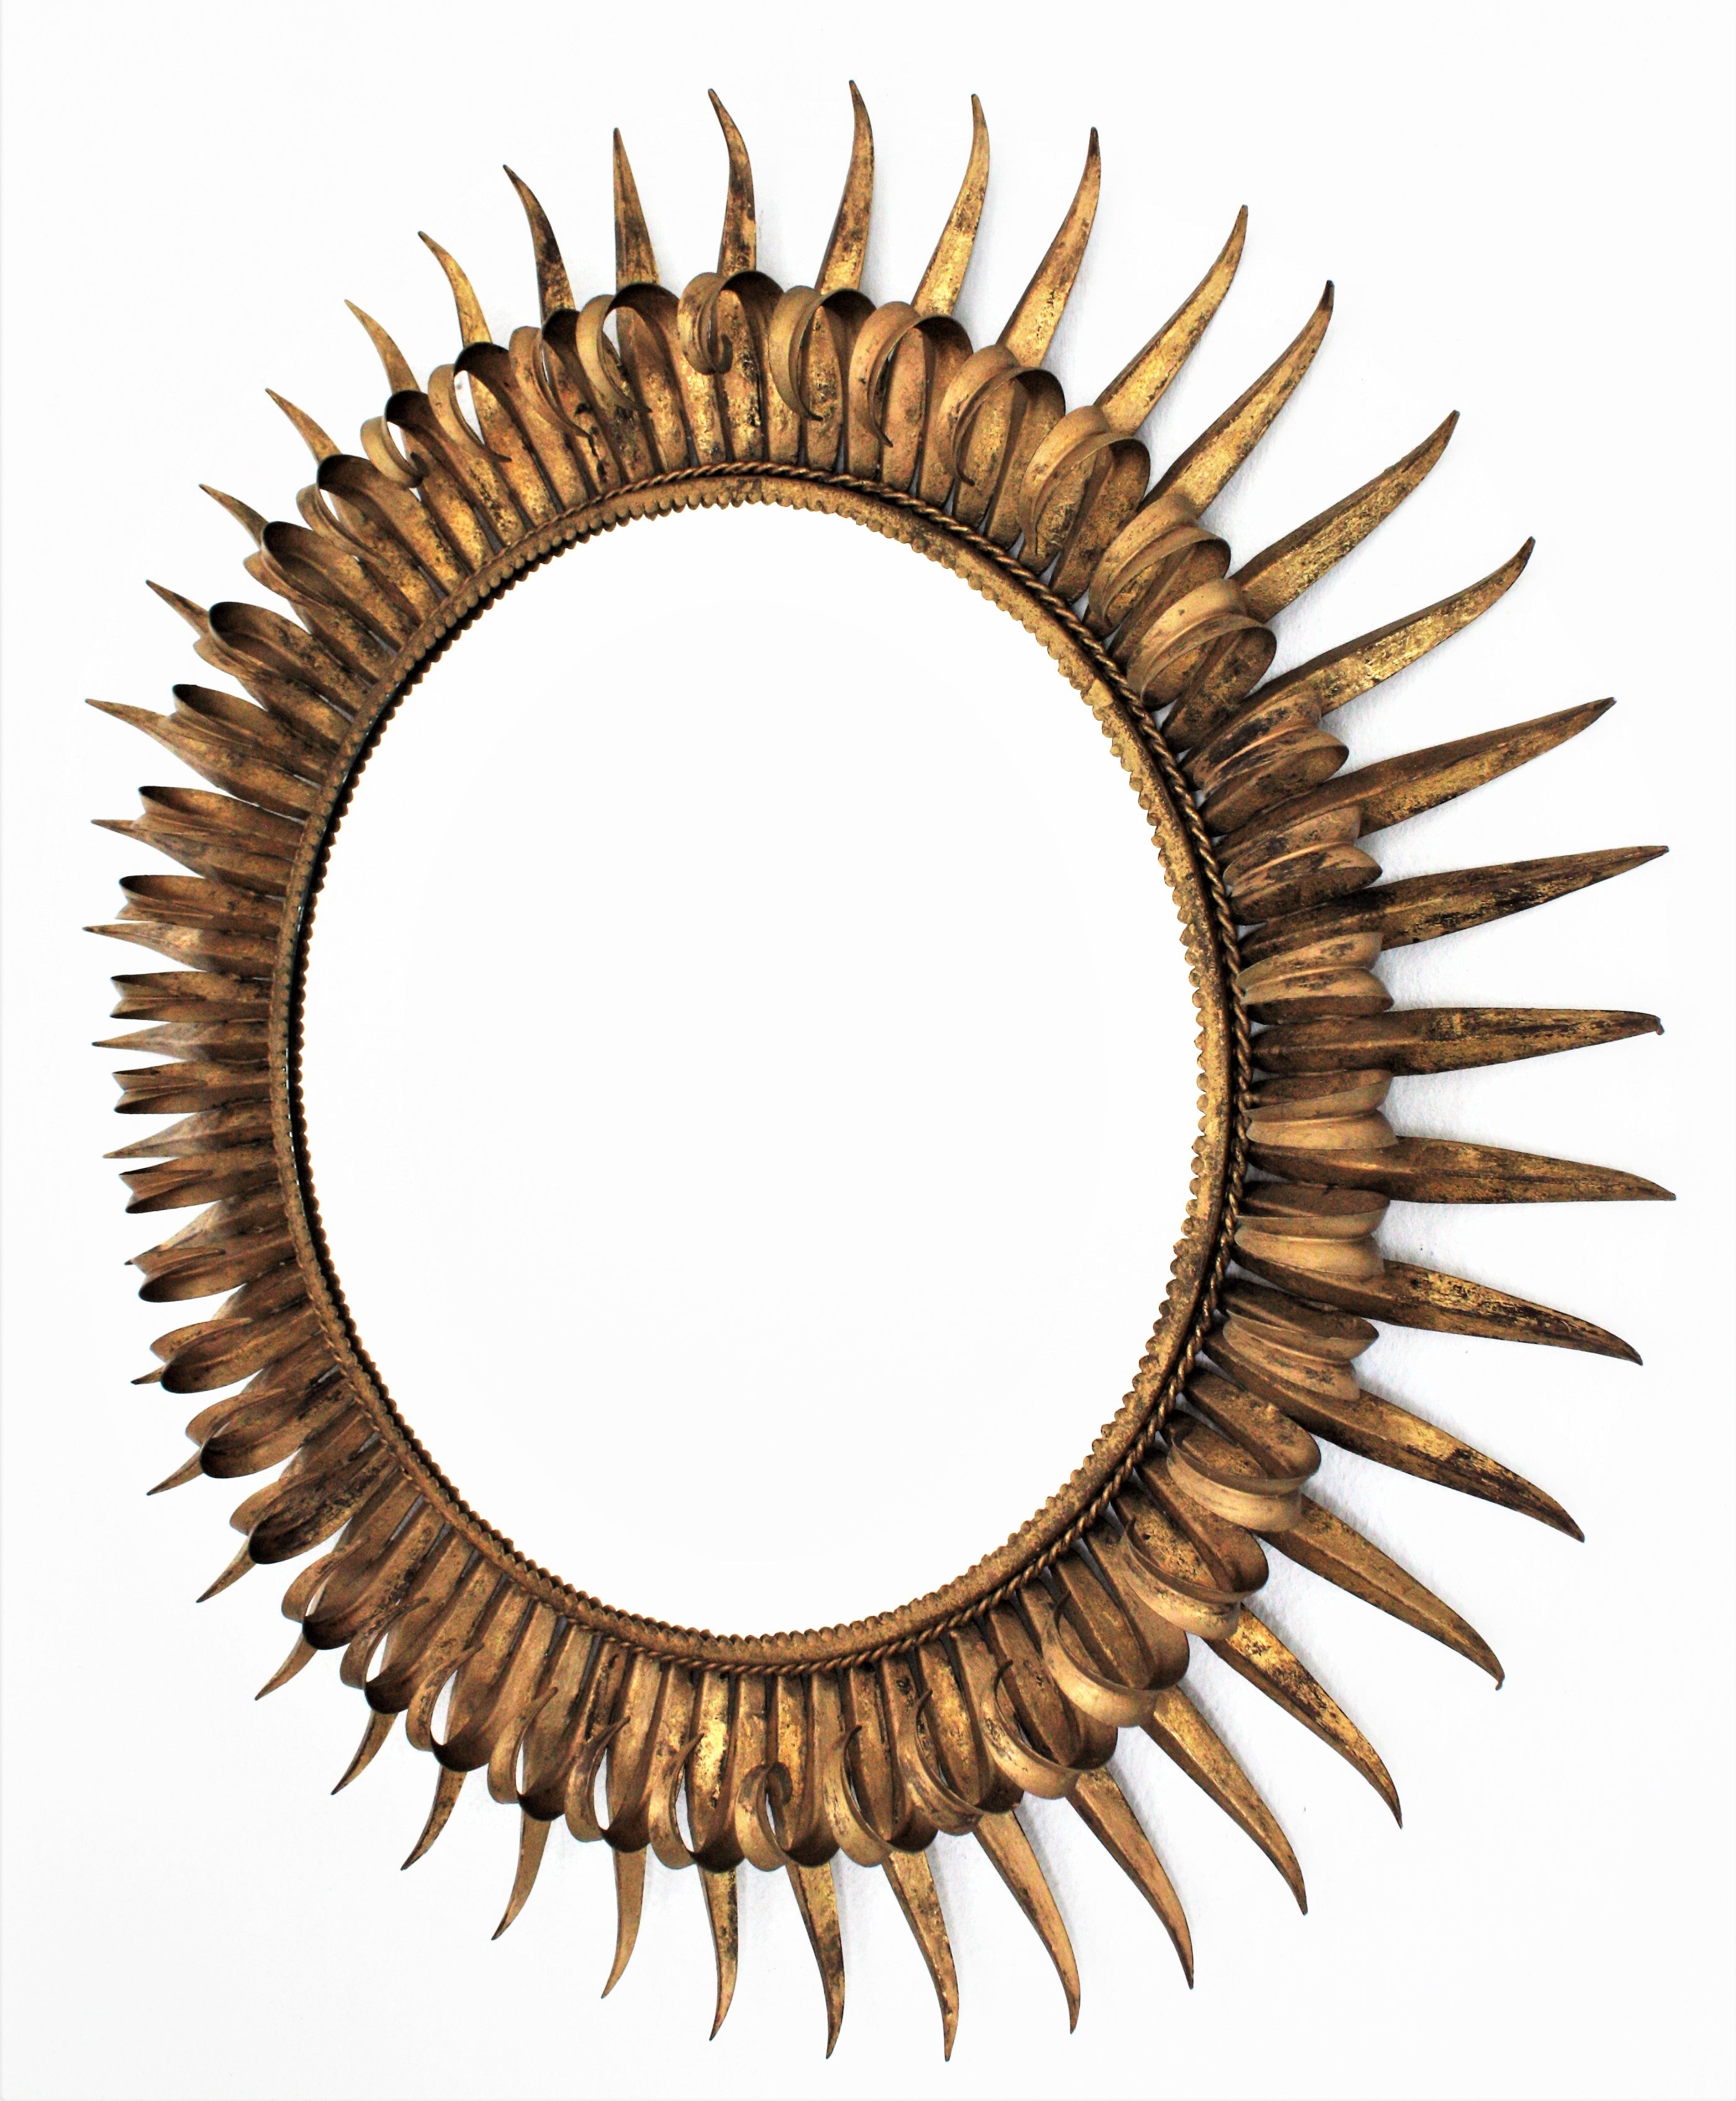 Large eyelash round sunburst mirror, gold gilt wrought iron, France, 1950s
Stunning large sized double layered eyelash gilt iron sunburst mirror with gold leaf finish. 
The frame is made by alternating hand-hammered curved and straight rays in